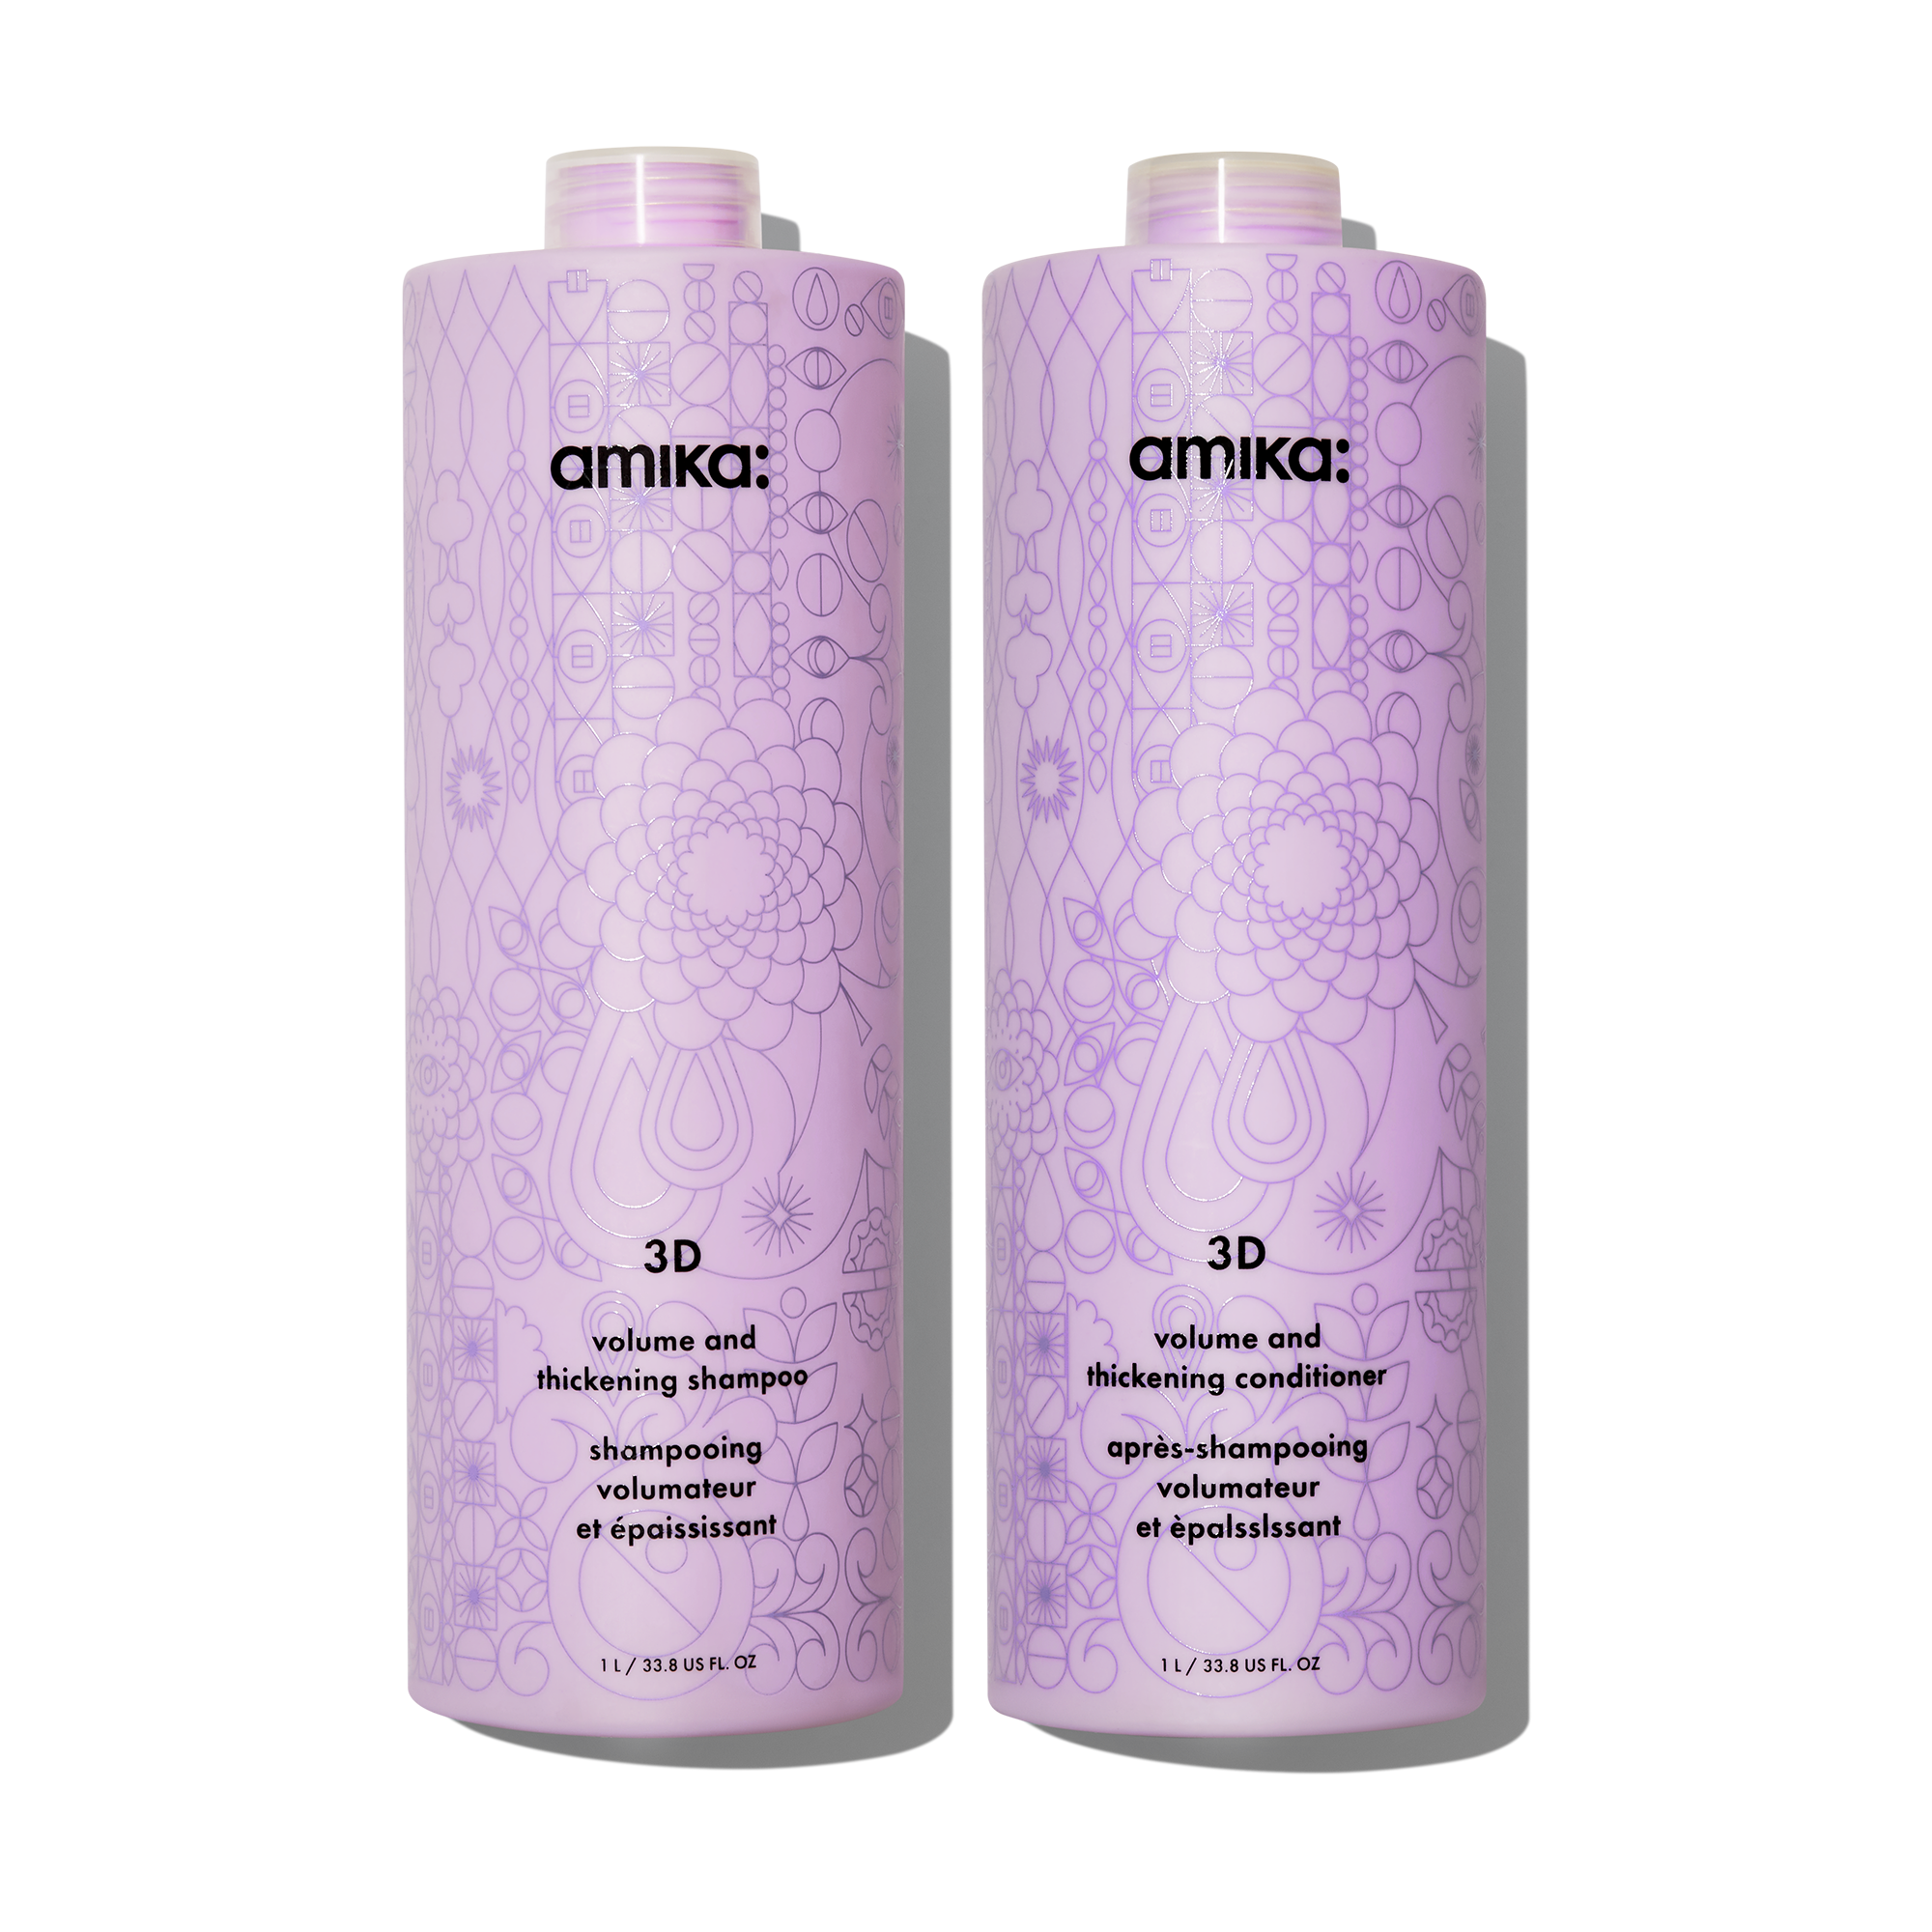 Amika 3D Volume and Thickening Shampoo and Conditioner Liter Duo ($136 Value) / 32OZ